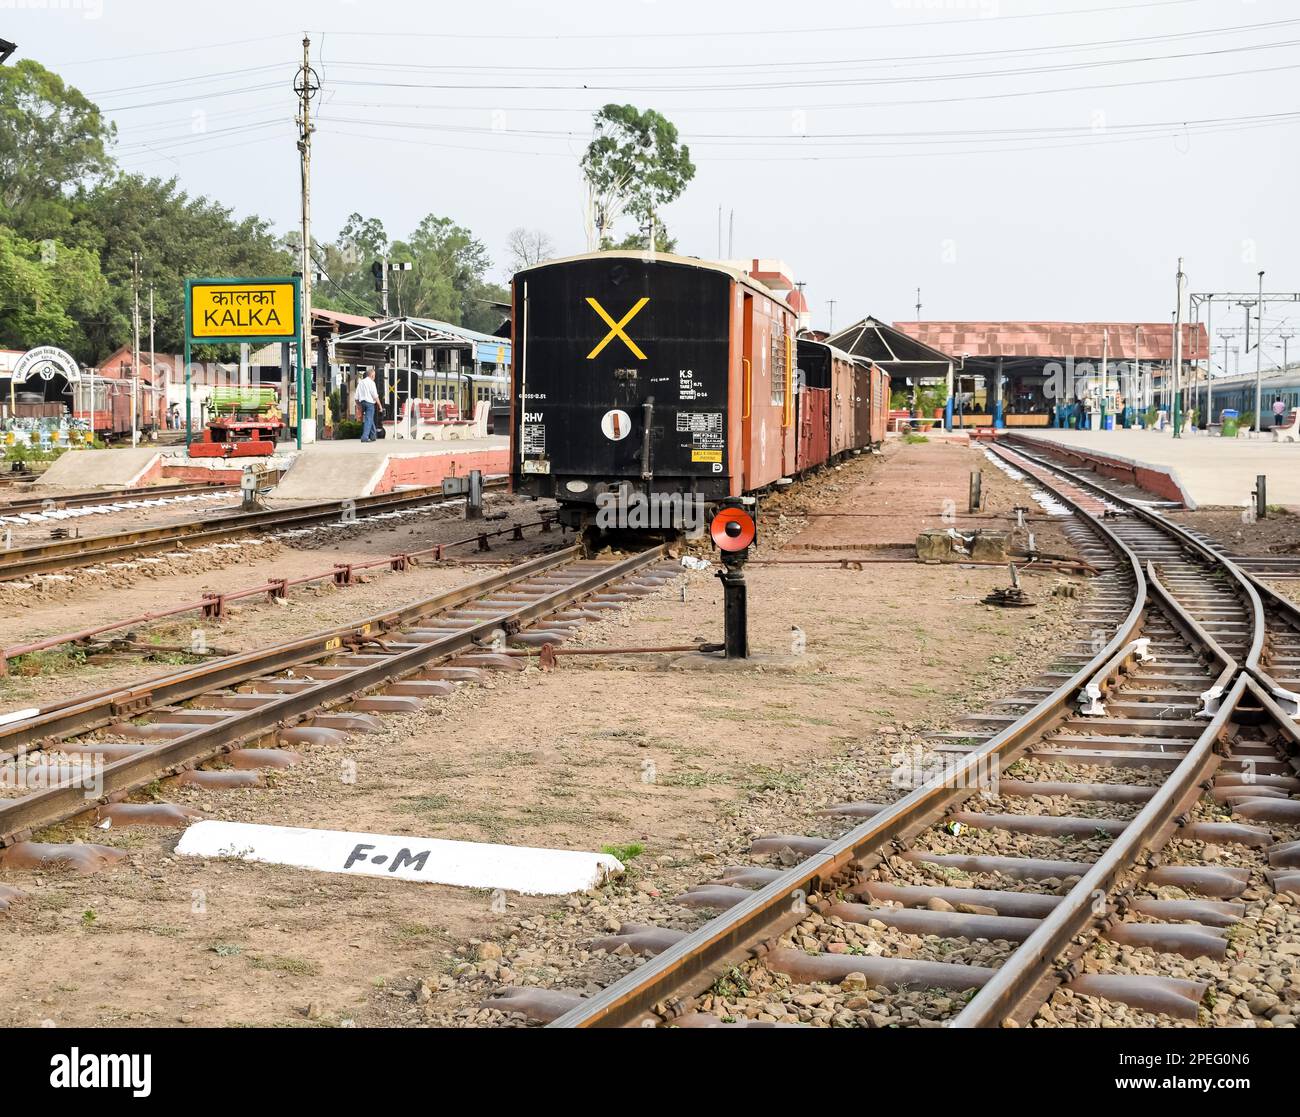 View of Toy train Railway Tracks from the middle during daytime near Kalka railway station in India, Toy train track view, Indian Railway junction, He Stock Photo